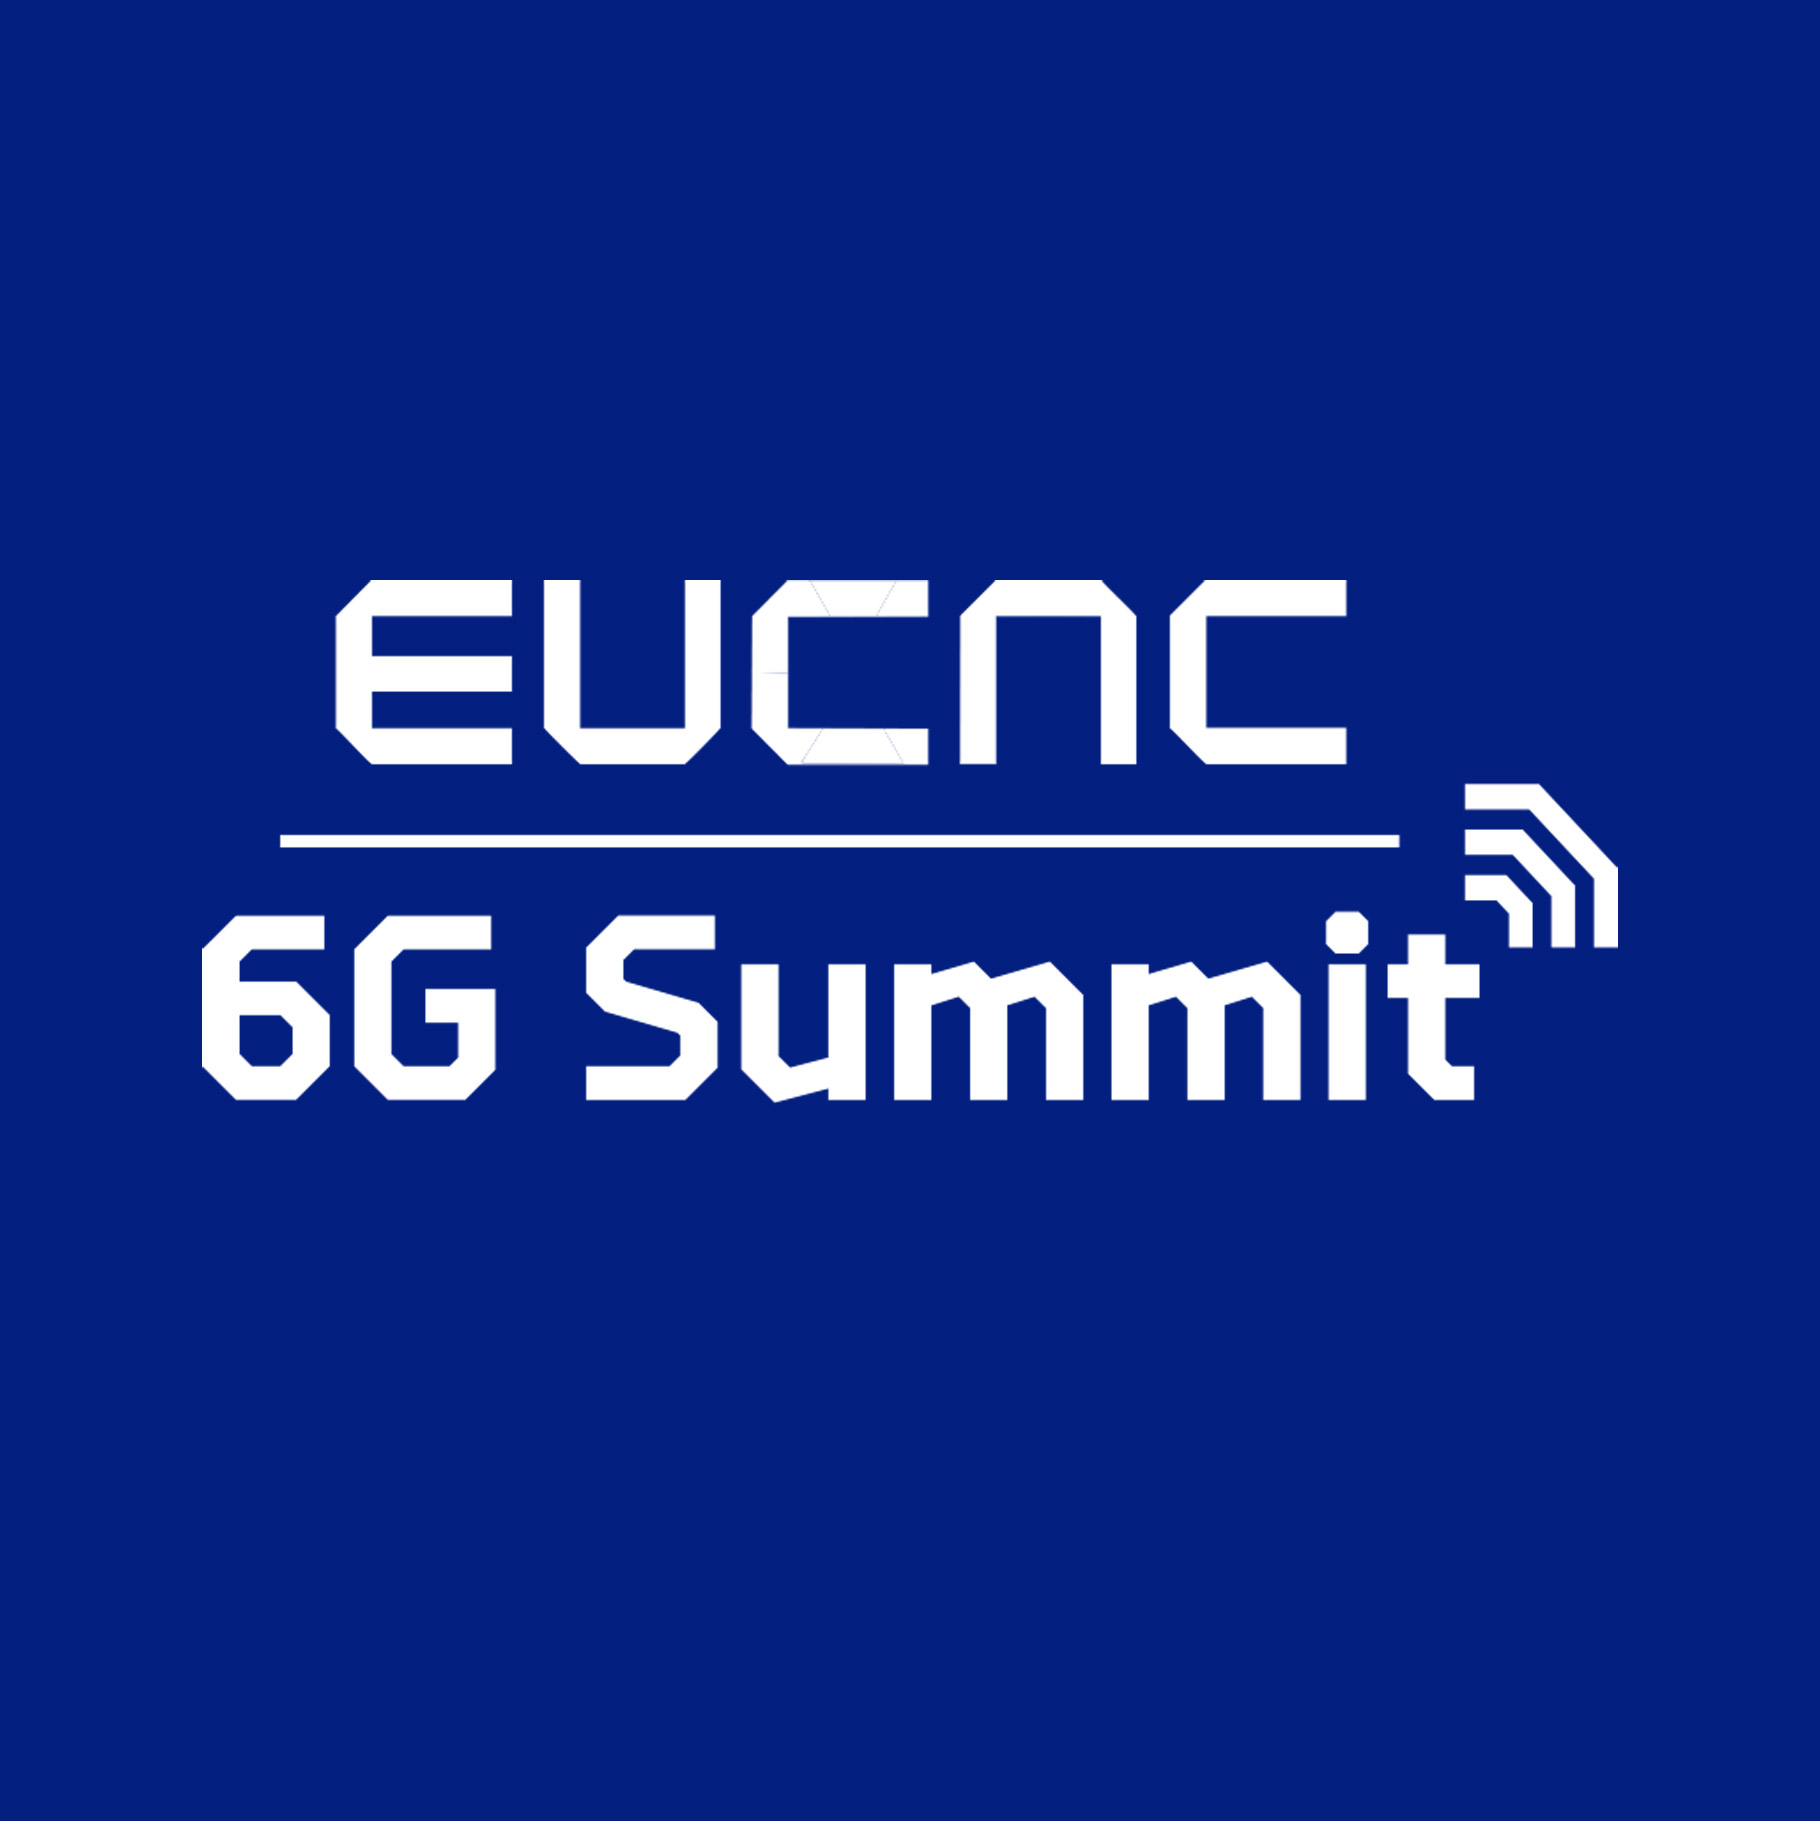 Presenting HORSE at EuCNC and 6G Summit 2023